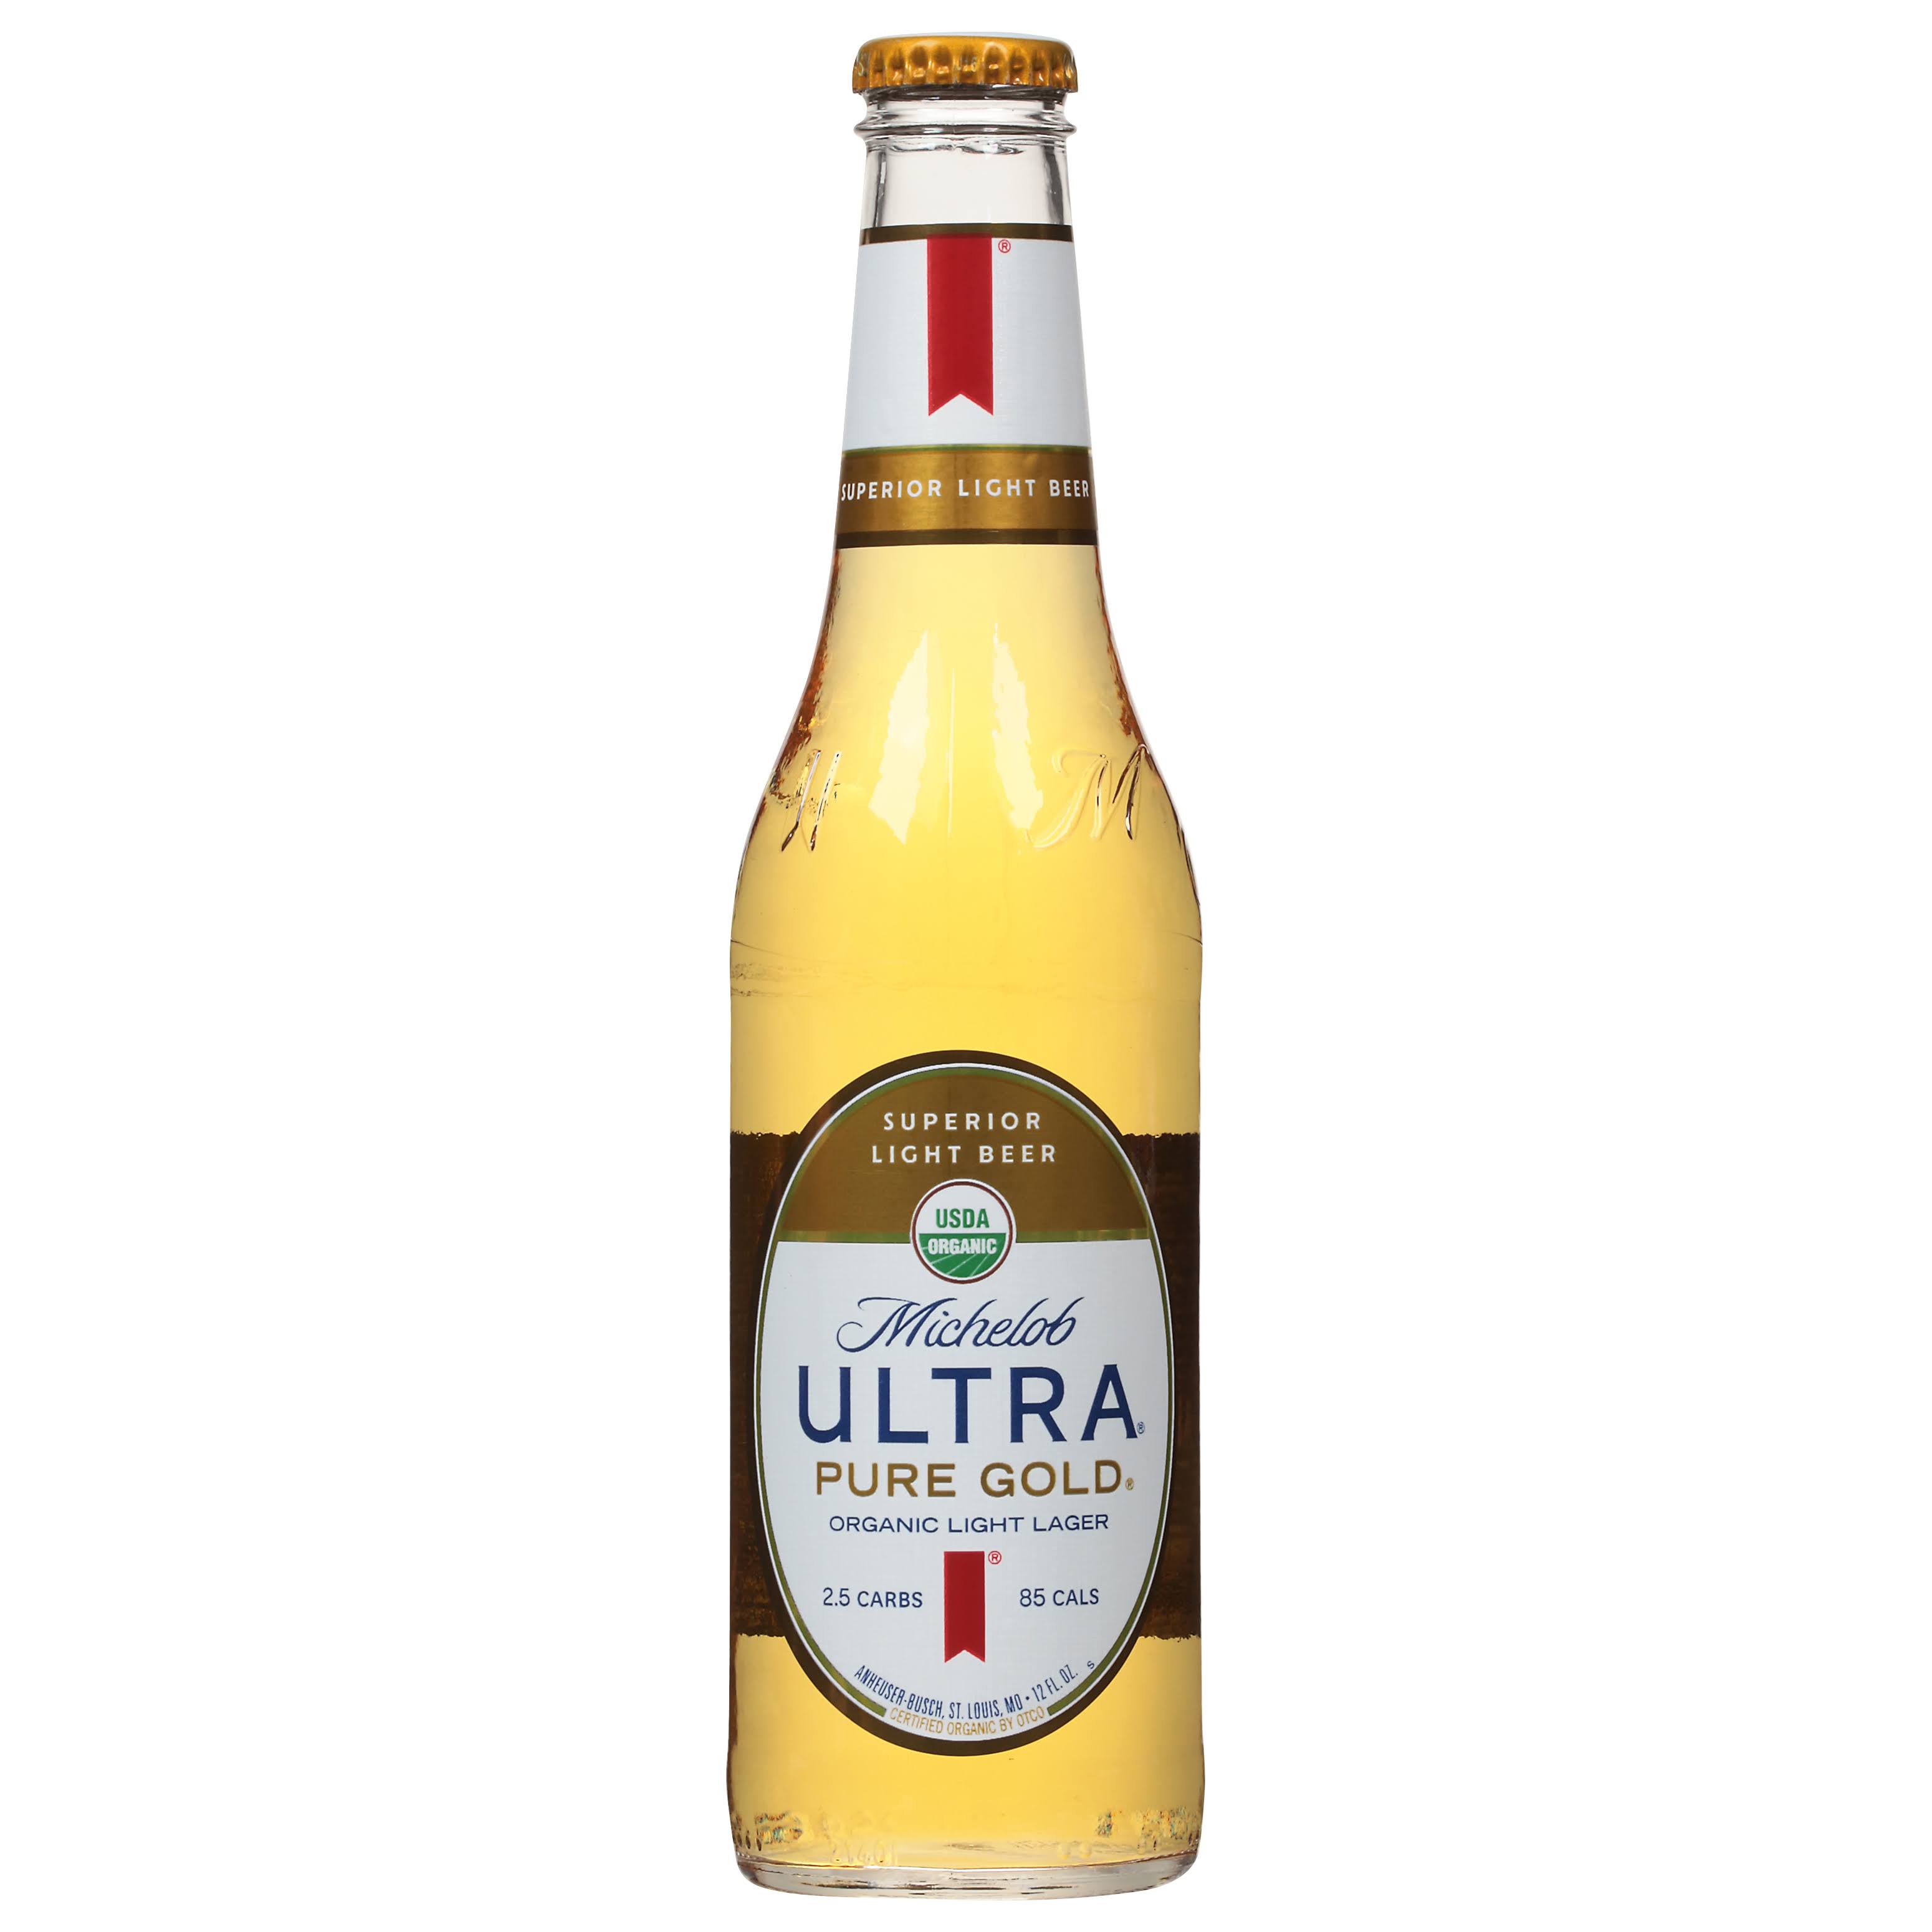 Michelob Ultra Pure Gold Lager, Light, Organic, Pure Gold - 12 fl oz